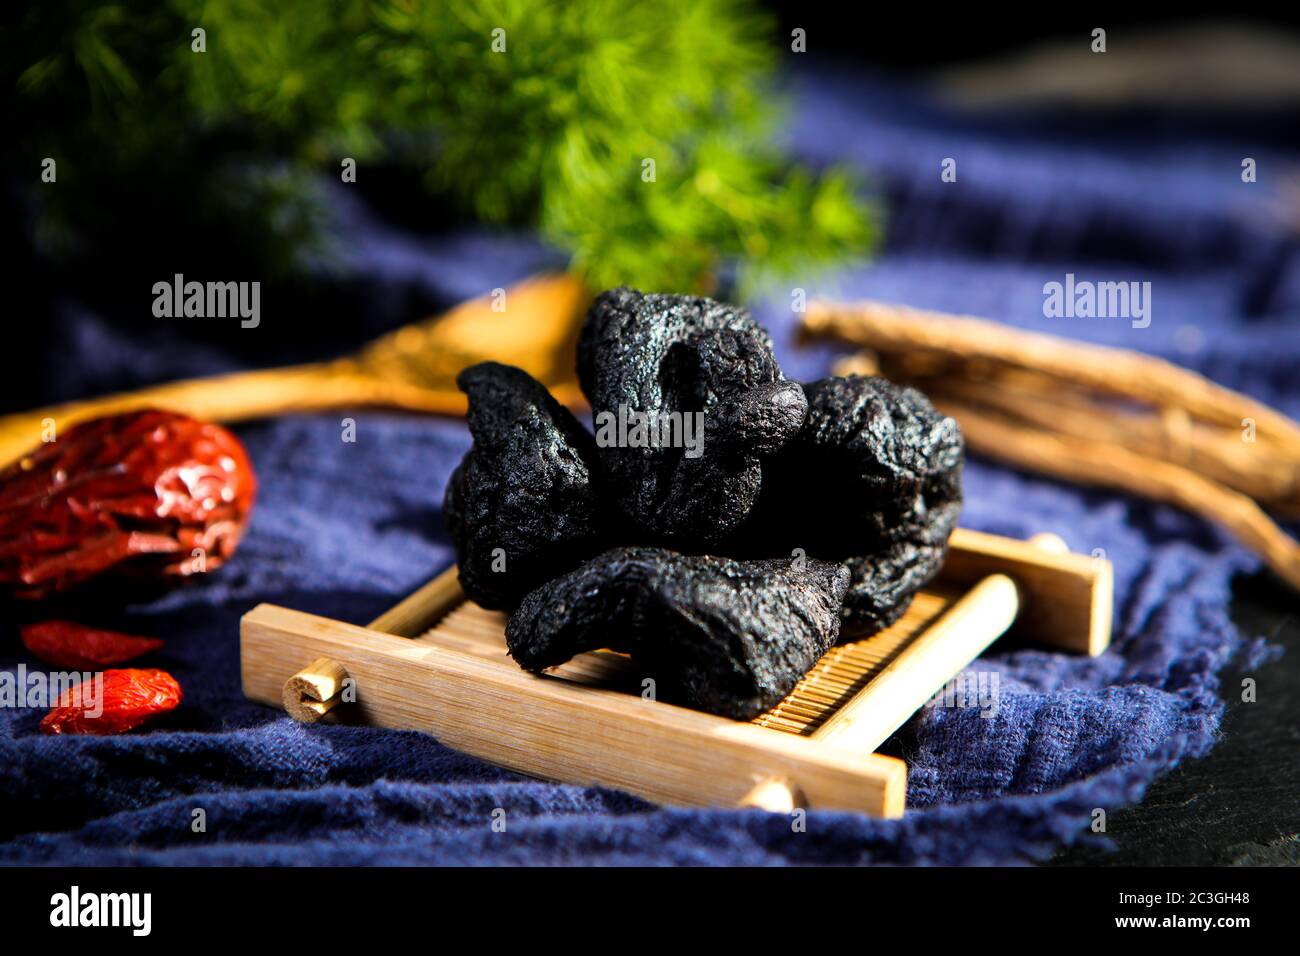 A small amount of medicinal herbs cultivated land Stock Photo